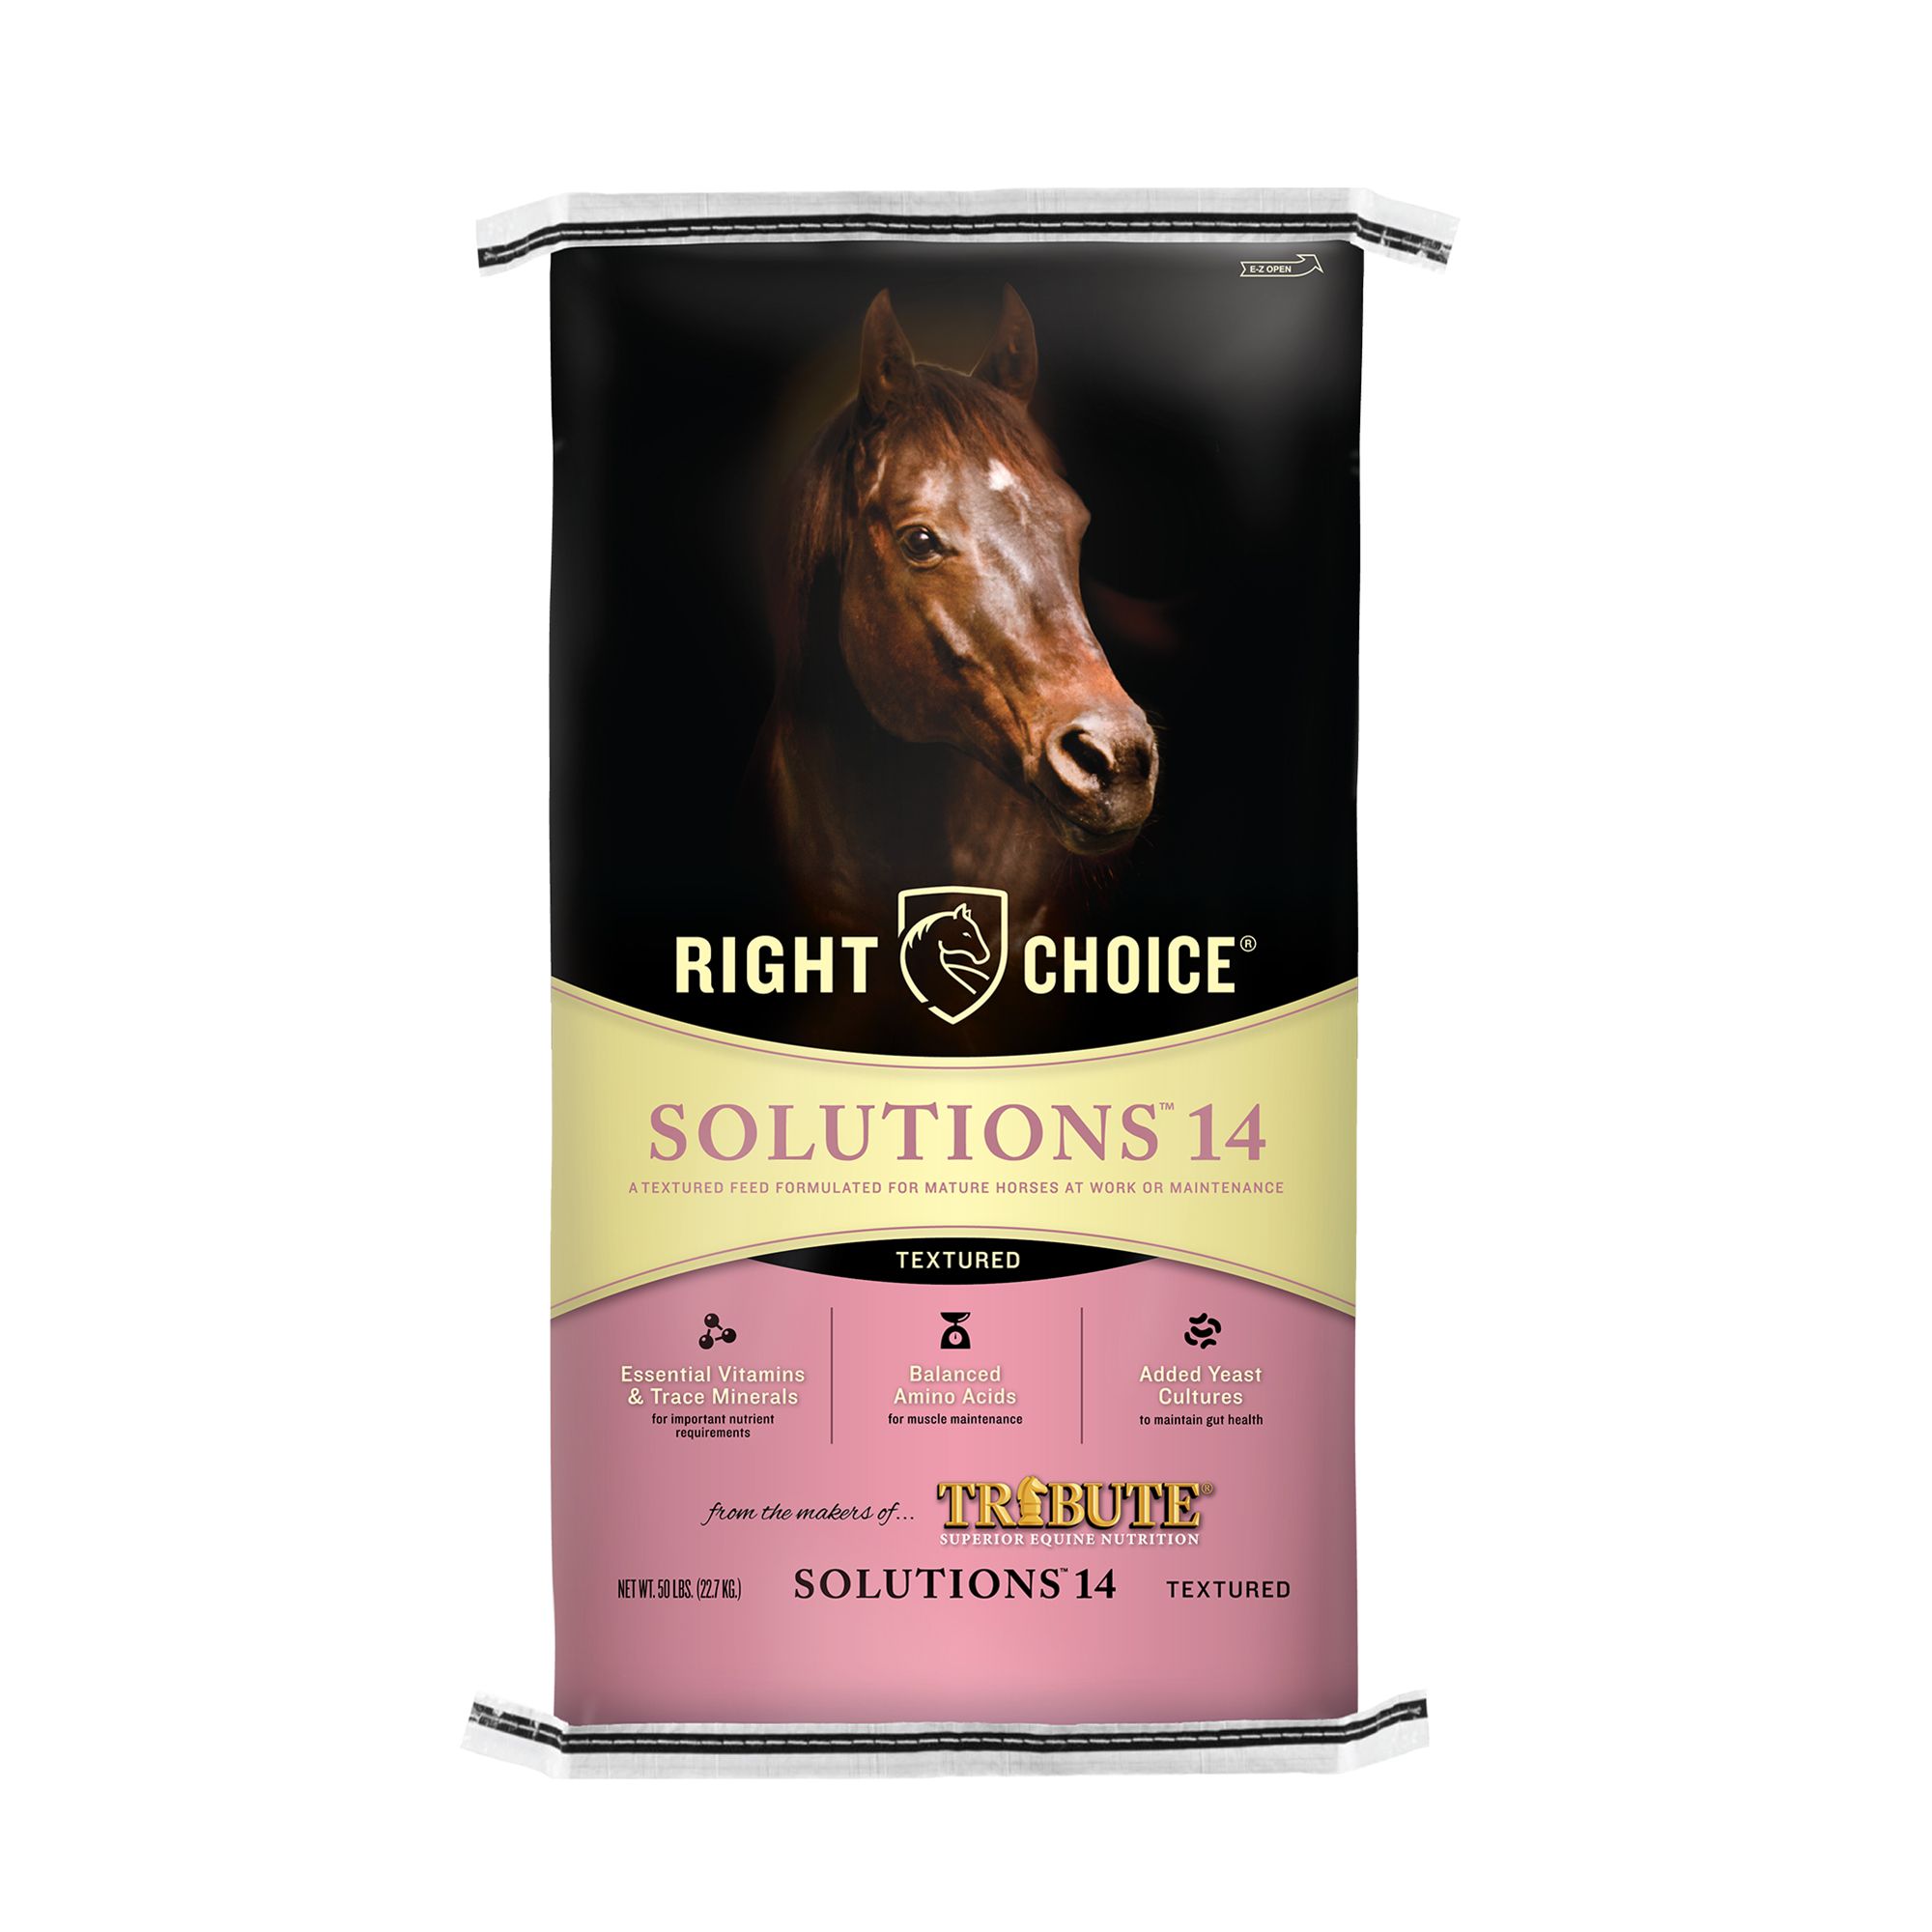 Right Choice® Solutions 14 Textured Horse Feed